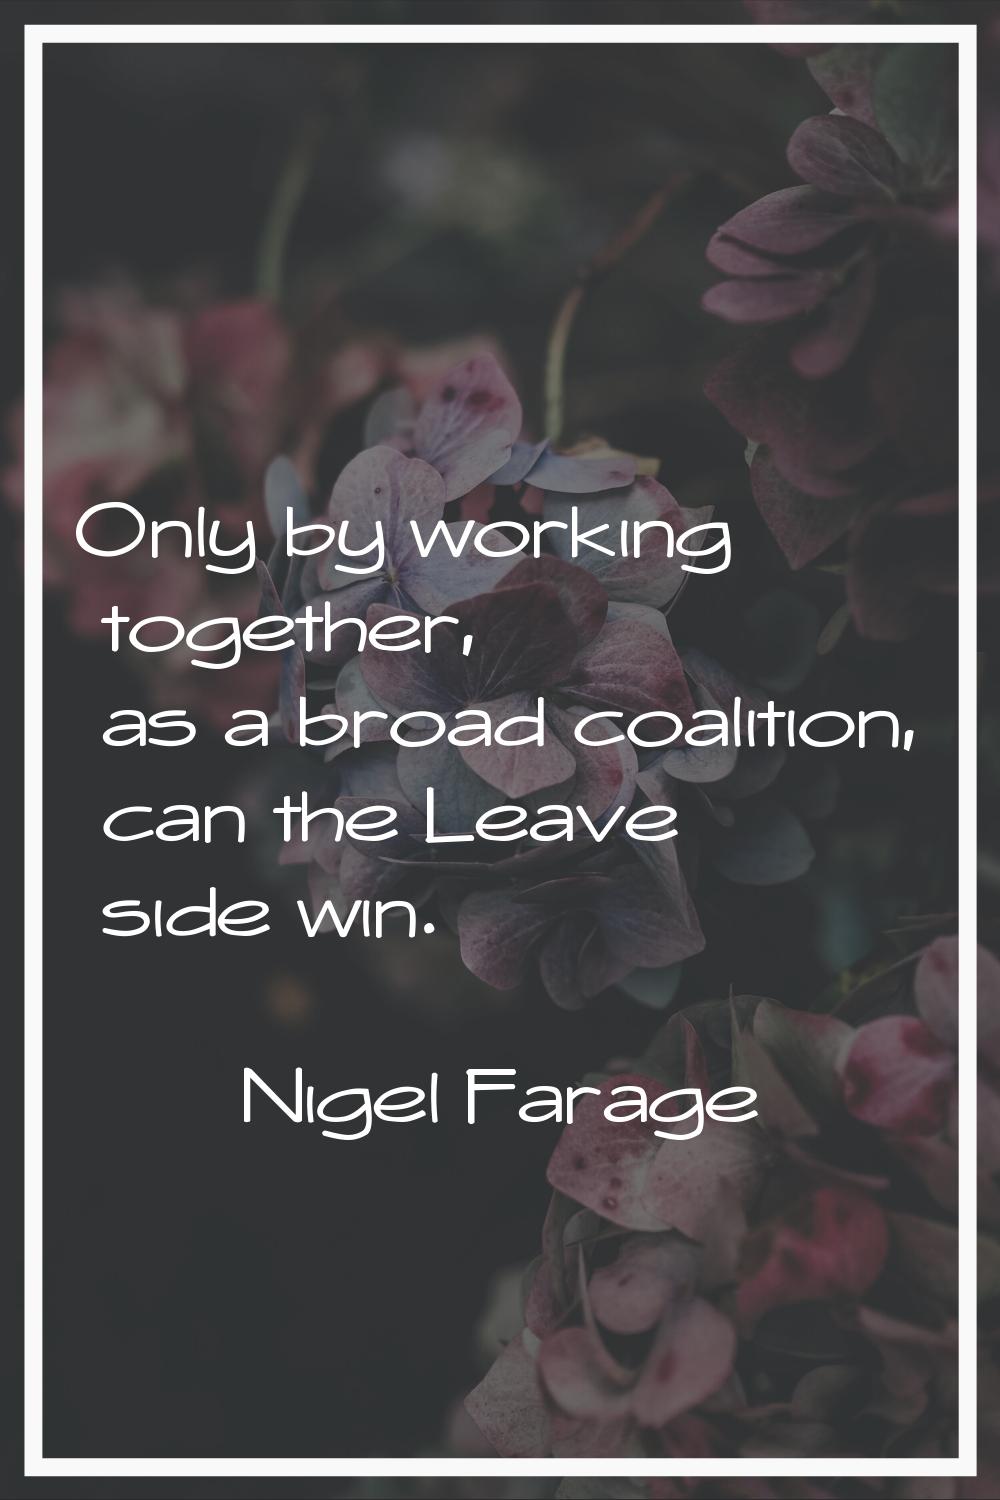 Only by working together, as a broad coalition, can the Leave side win.